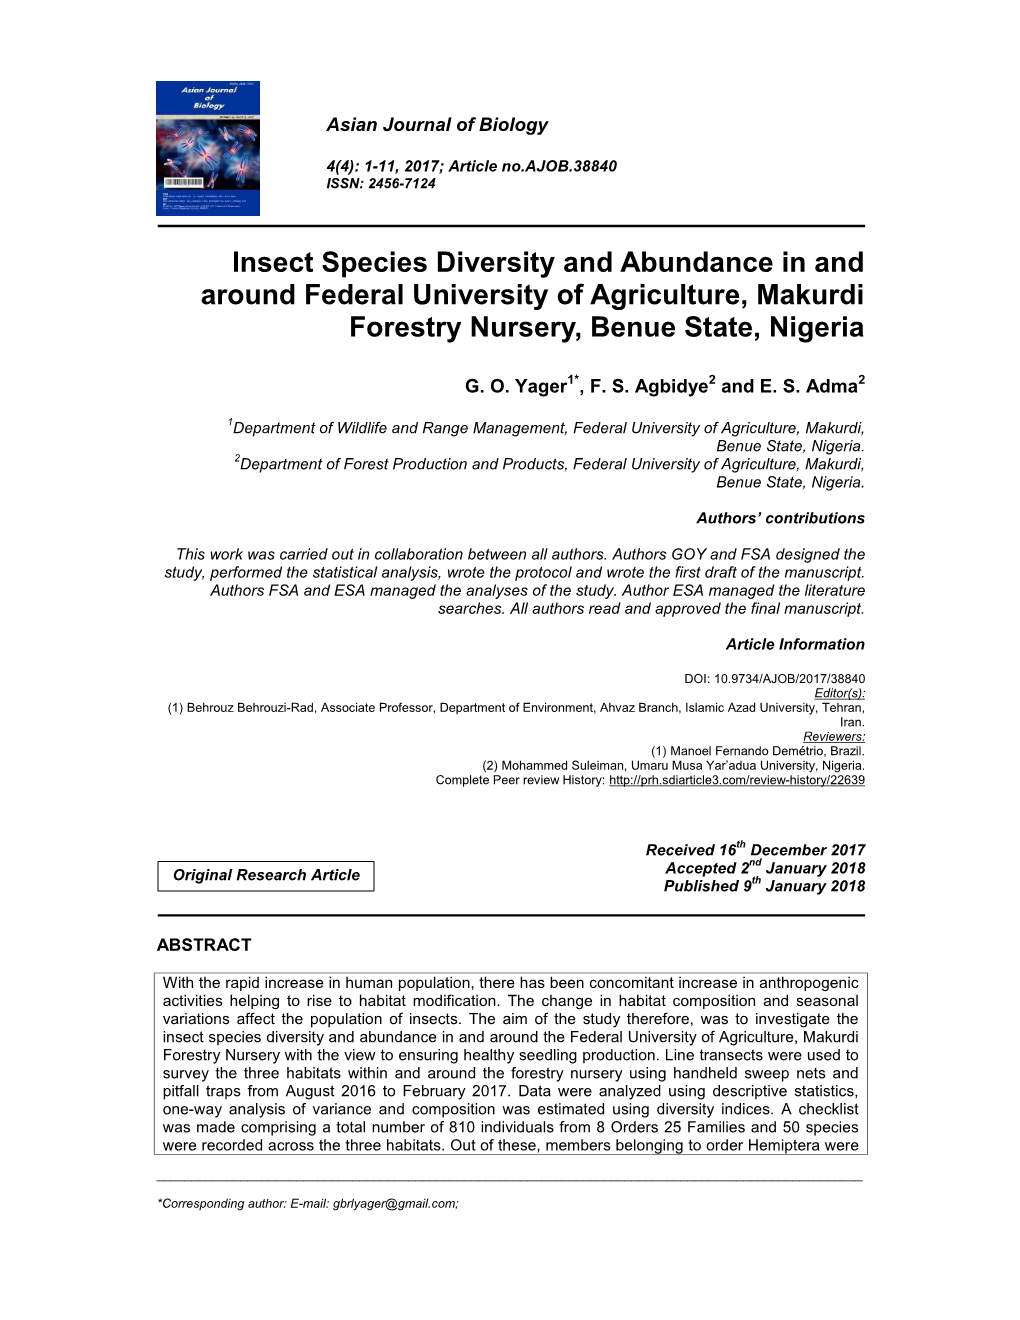 Insect Species Diversity and Abundance in and Around Federal University of Agriculture, Makurdi Forestry Nursery, Benue State, Nigeria